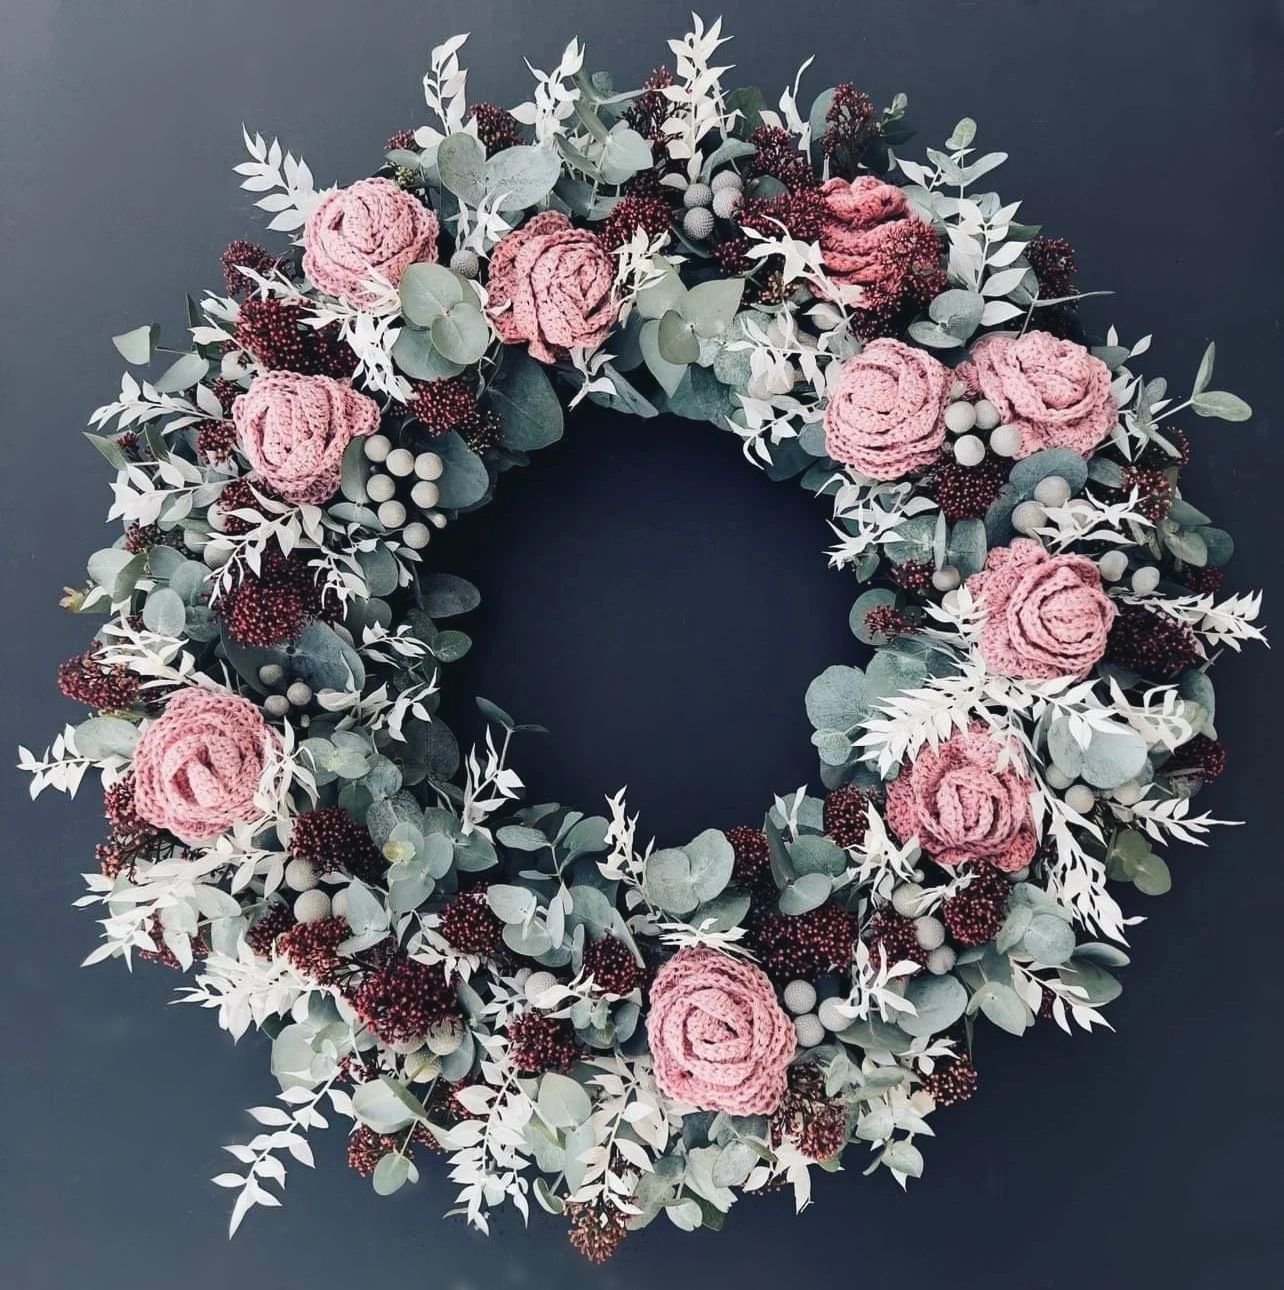 crochet roses on a funeral wreath